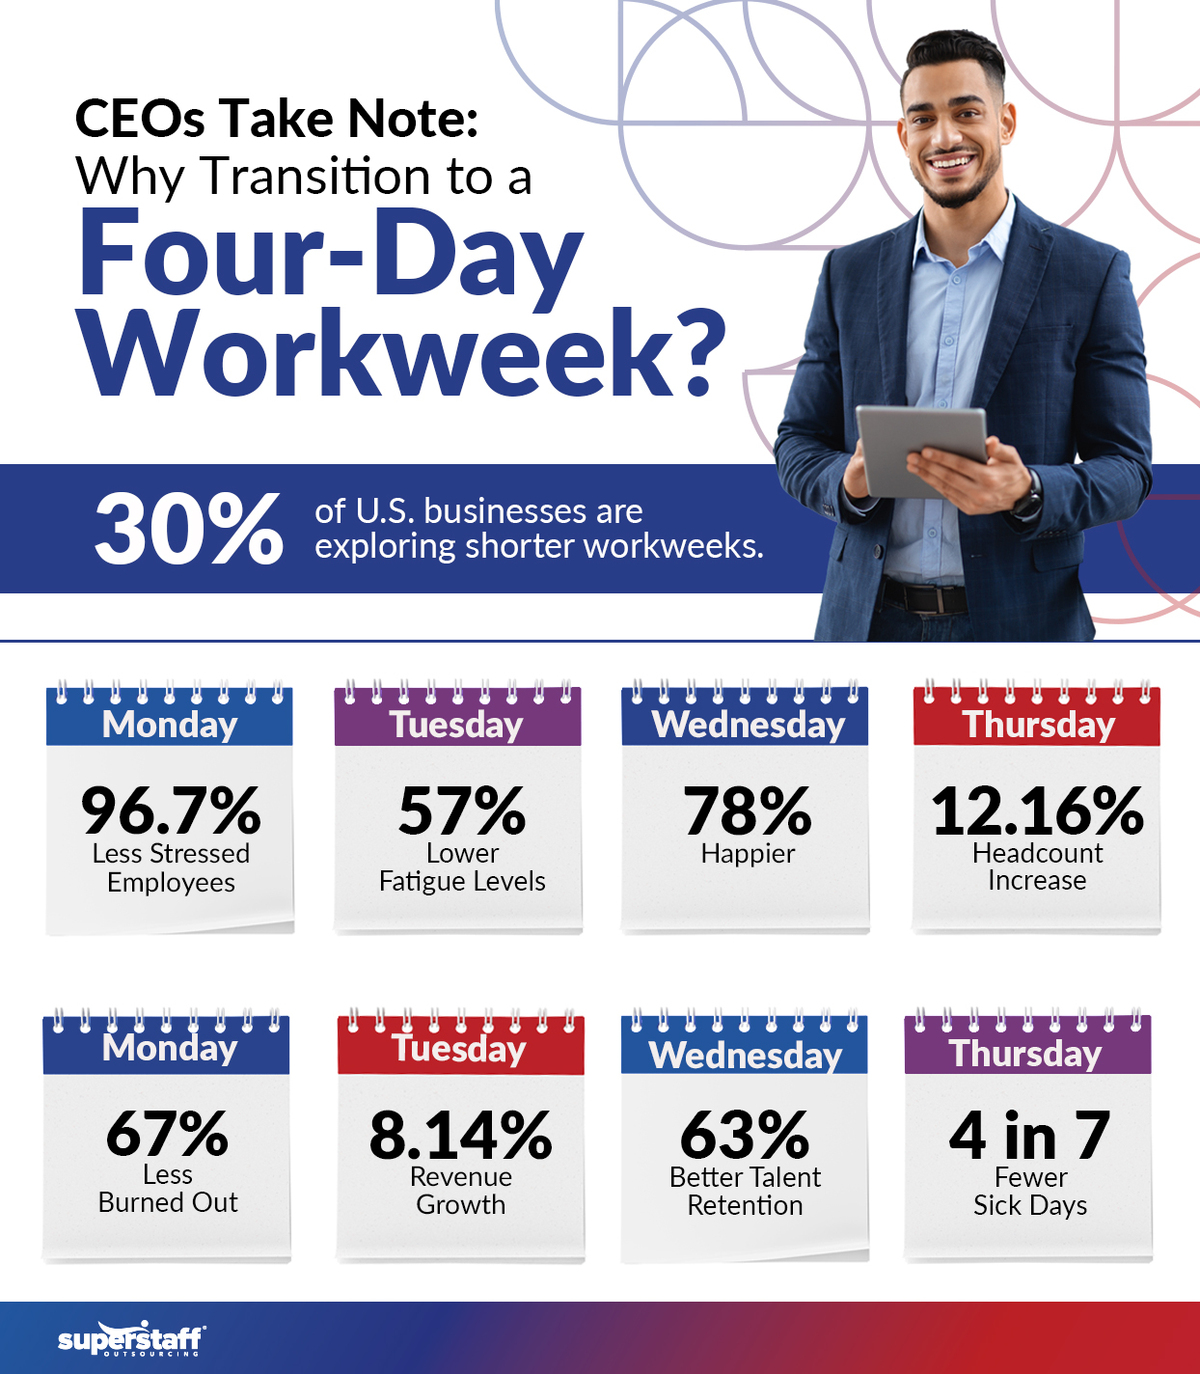 A CEO smiles while holding an iPad. Image caption reads: Why transition to a Four-Day Workweek?